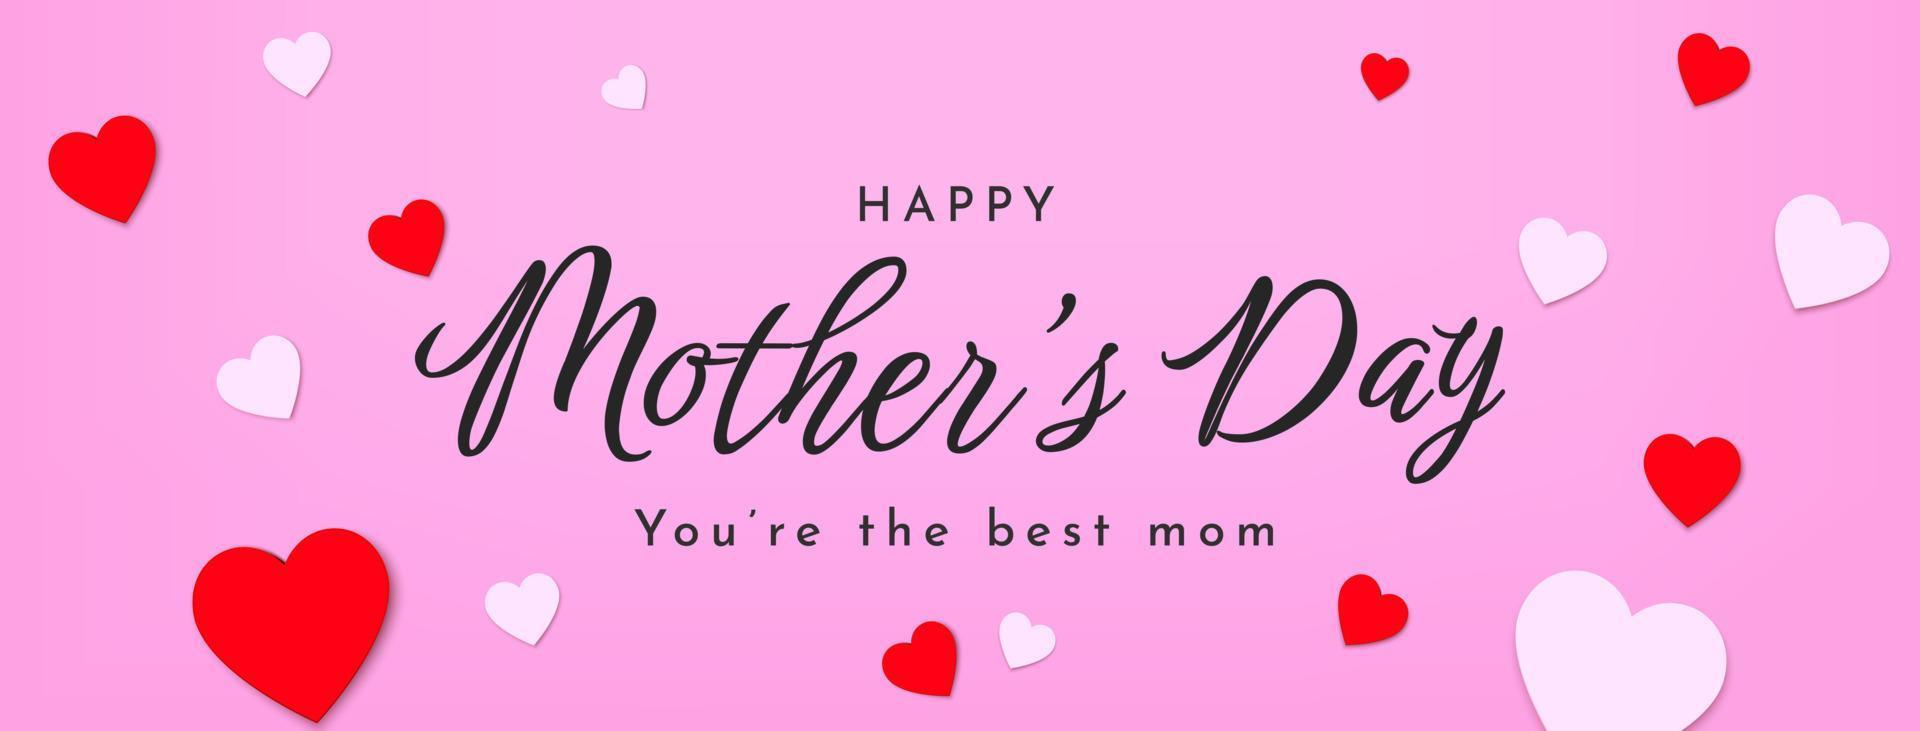 Happy mothers day banner with paper flying heart elements. Vector love symbol and calligraphic text happy mothers day on pink background.